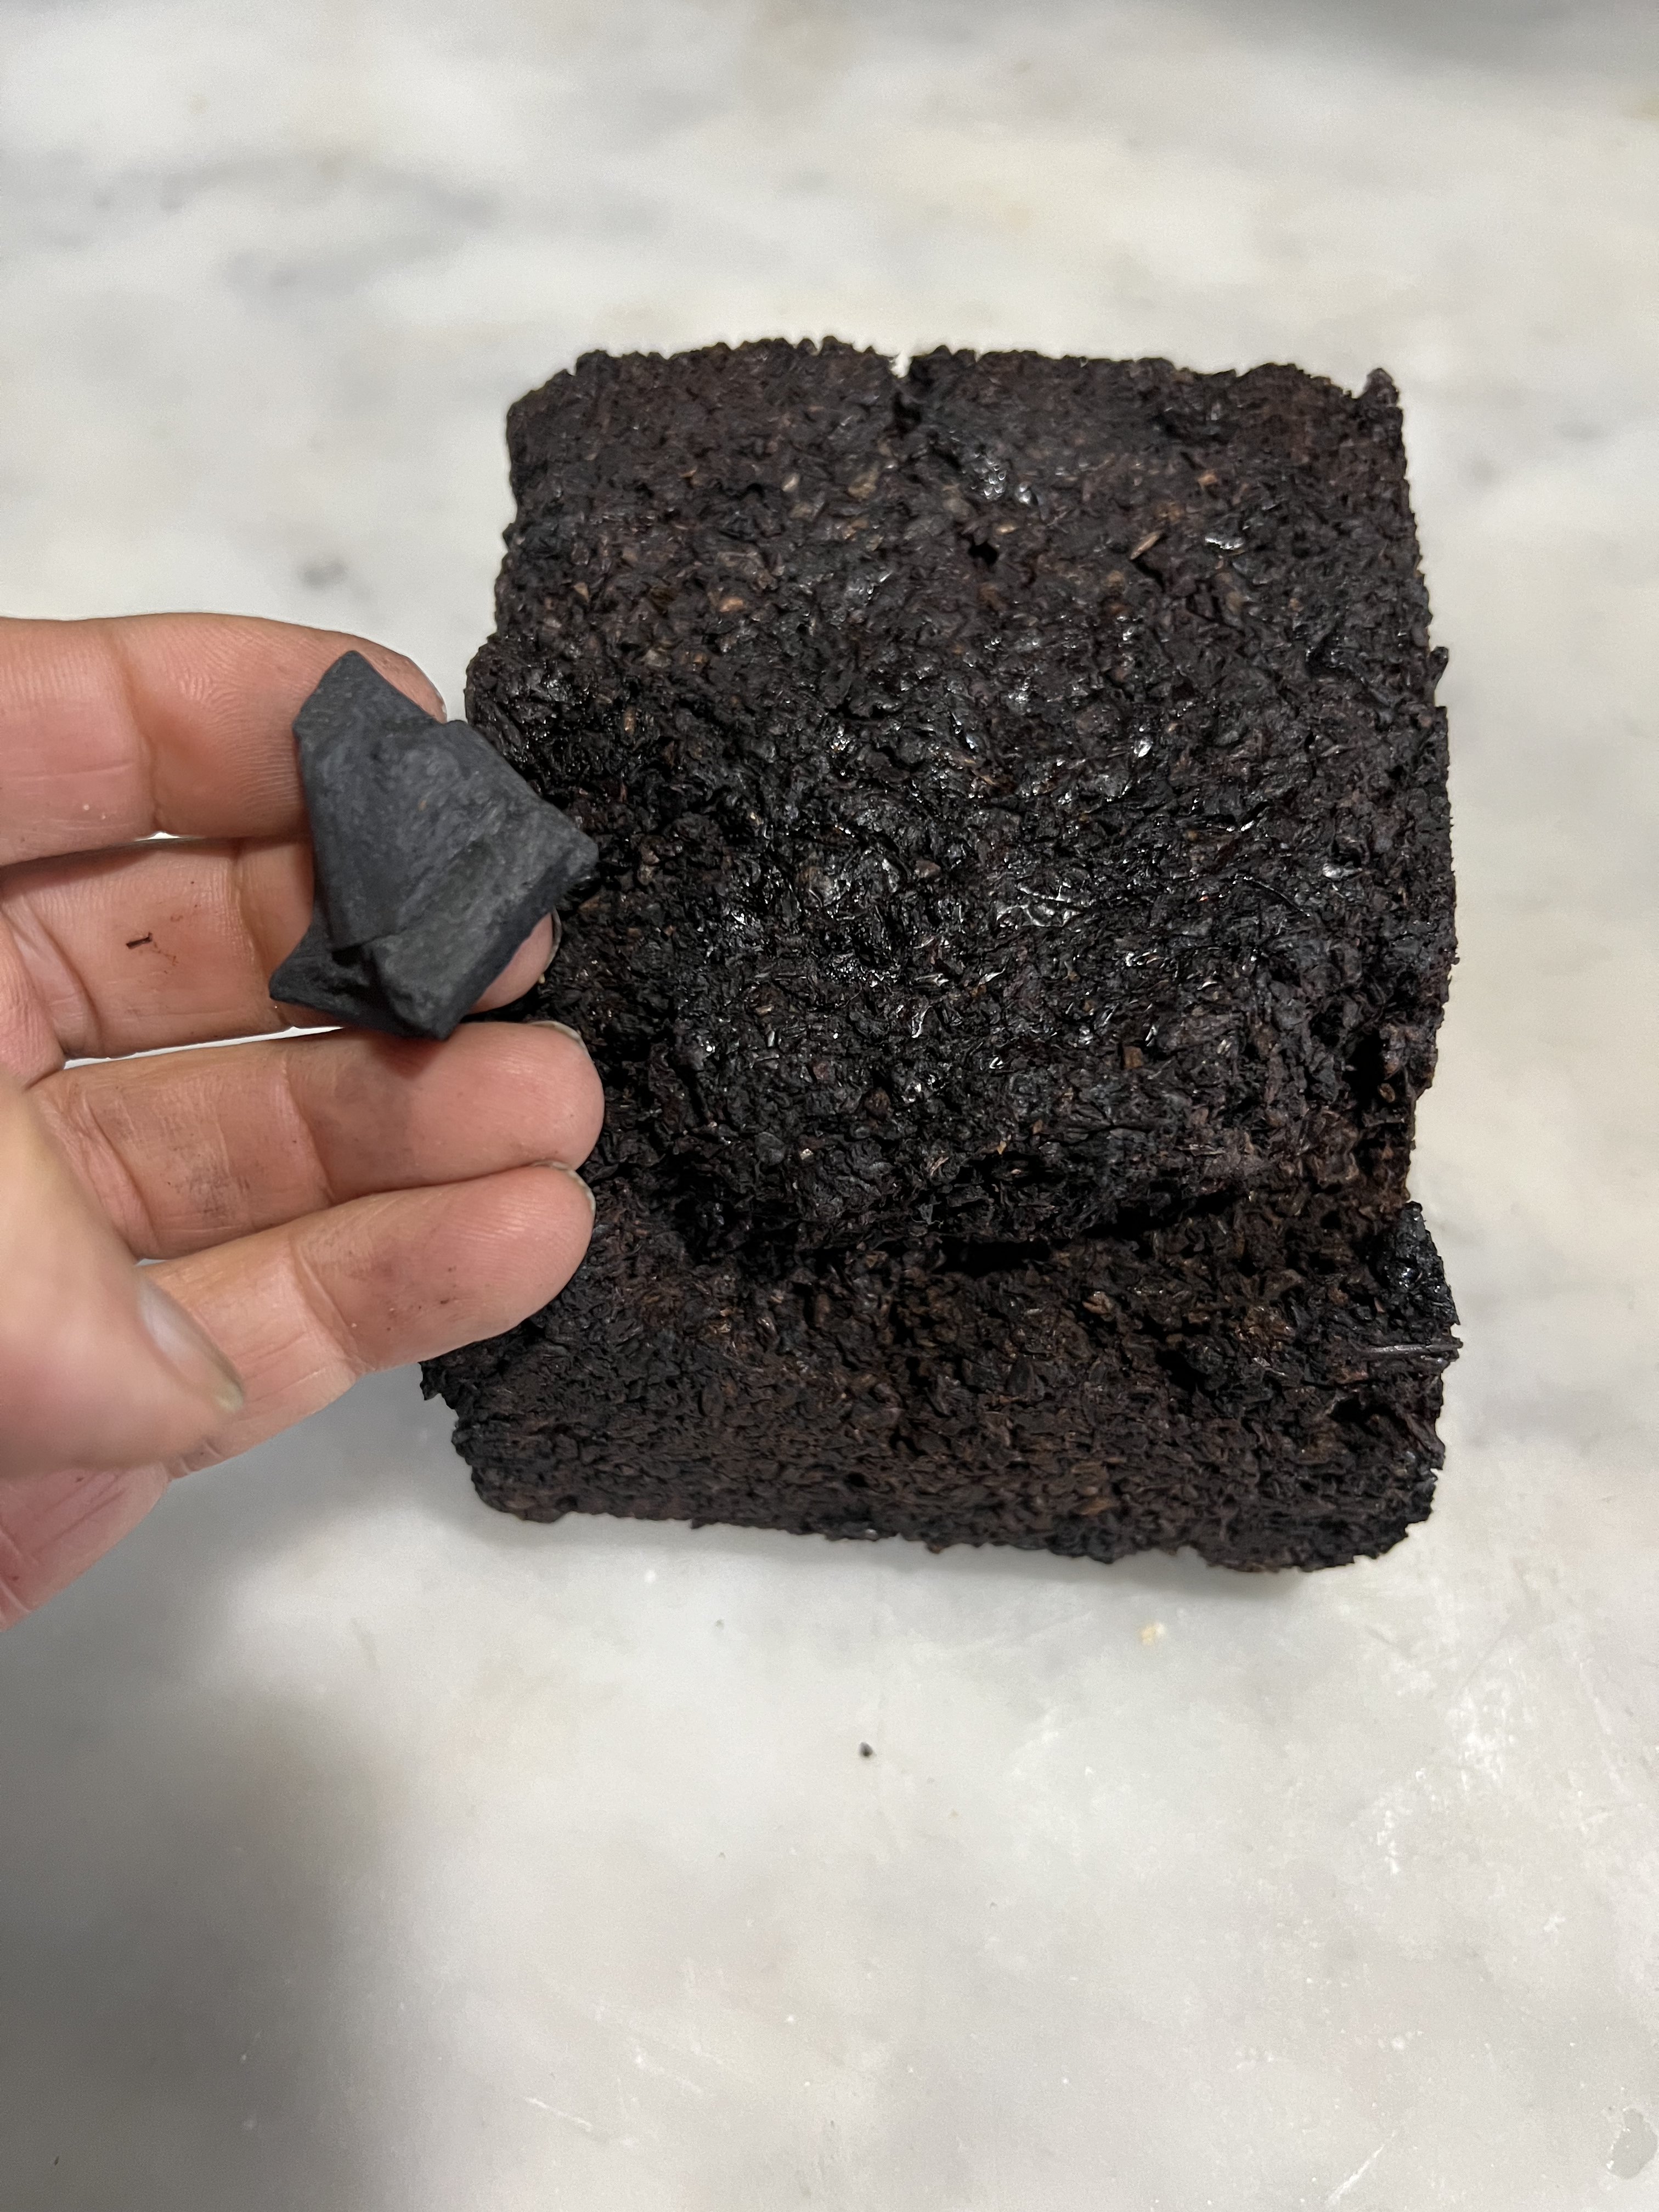 An Experimental Recipe for an Historic Pumpernickel